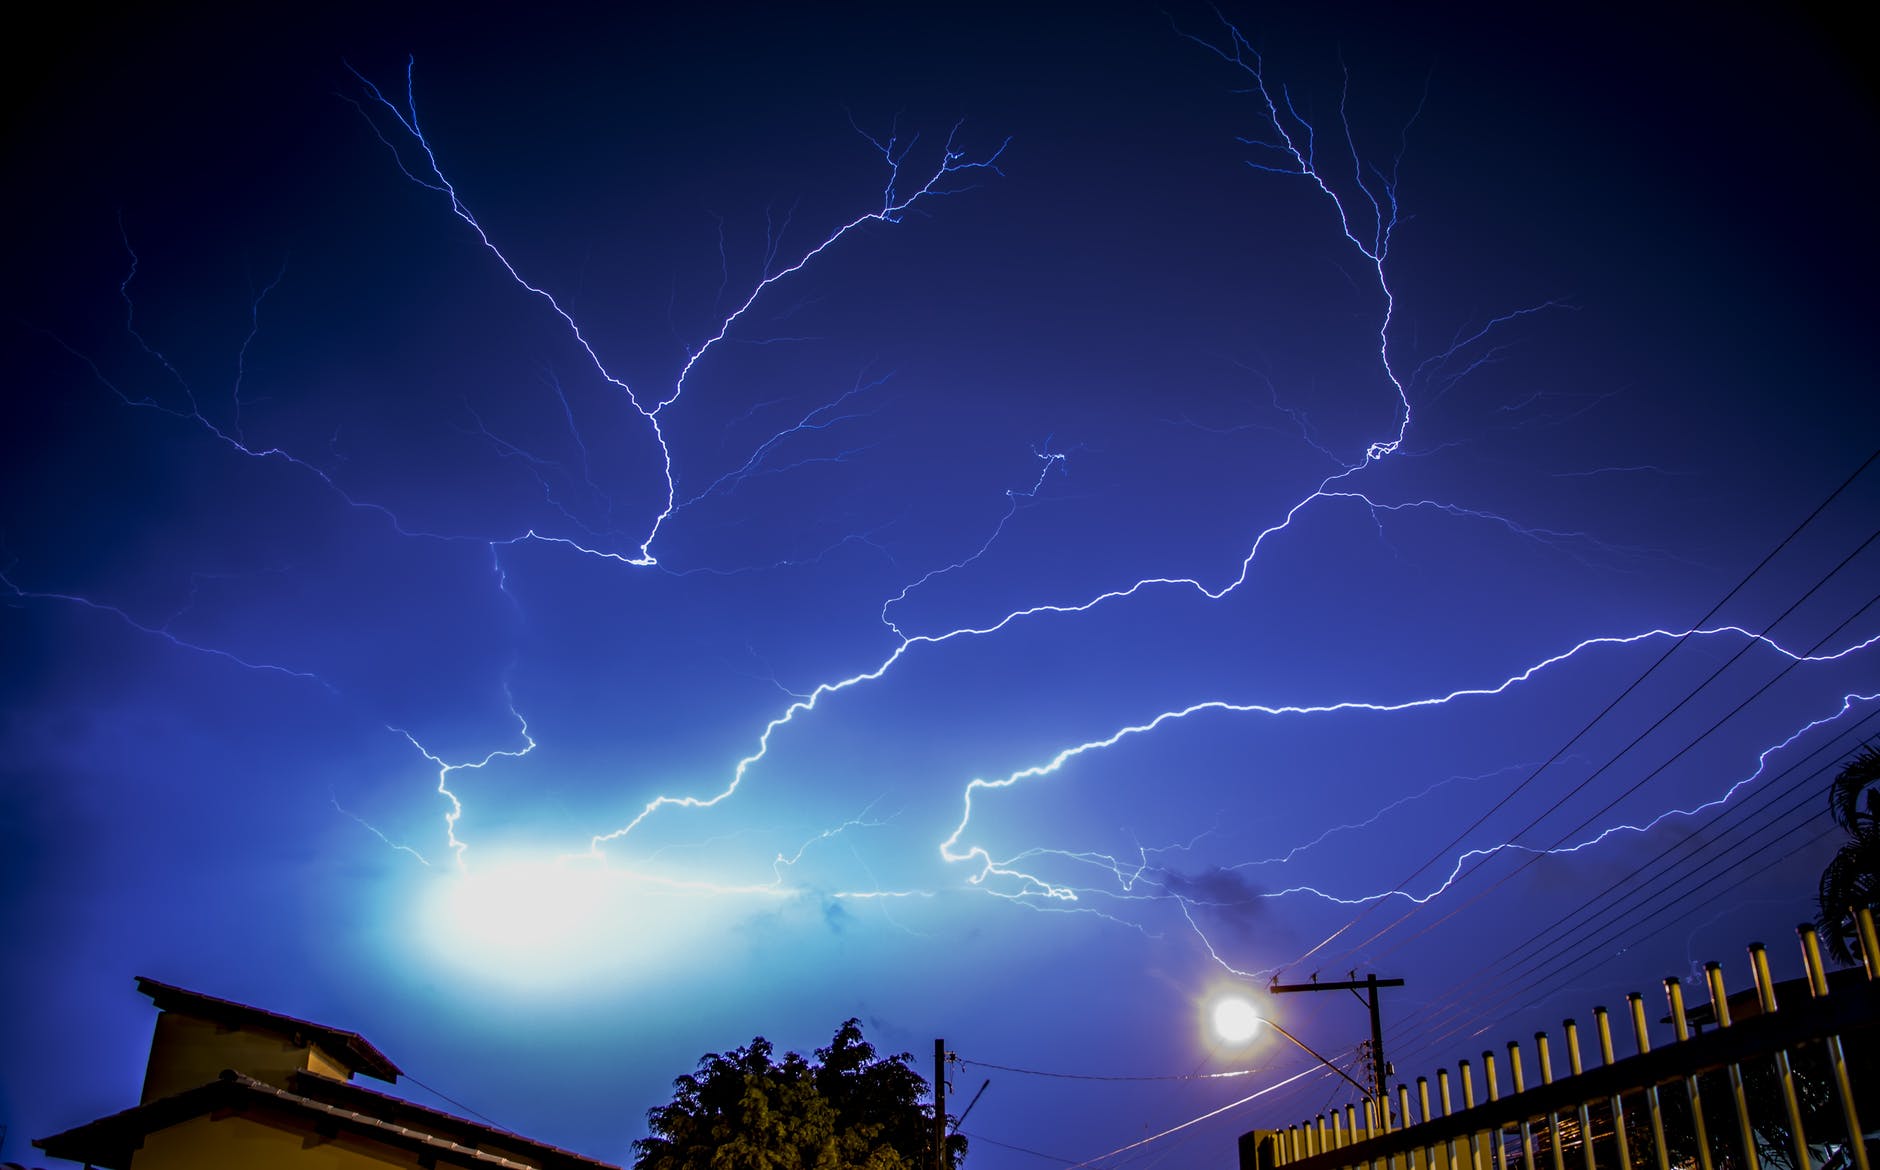 A lightning storm cut out their power.| Source: Pexels